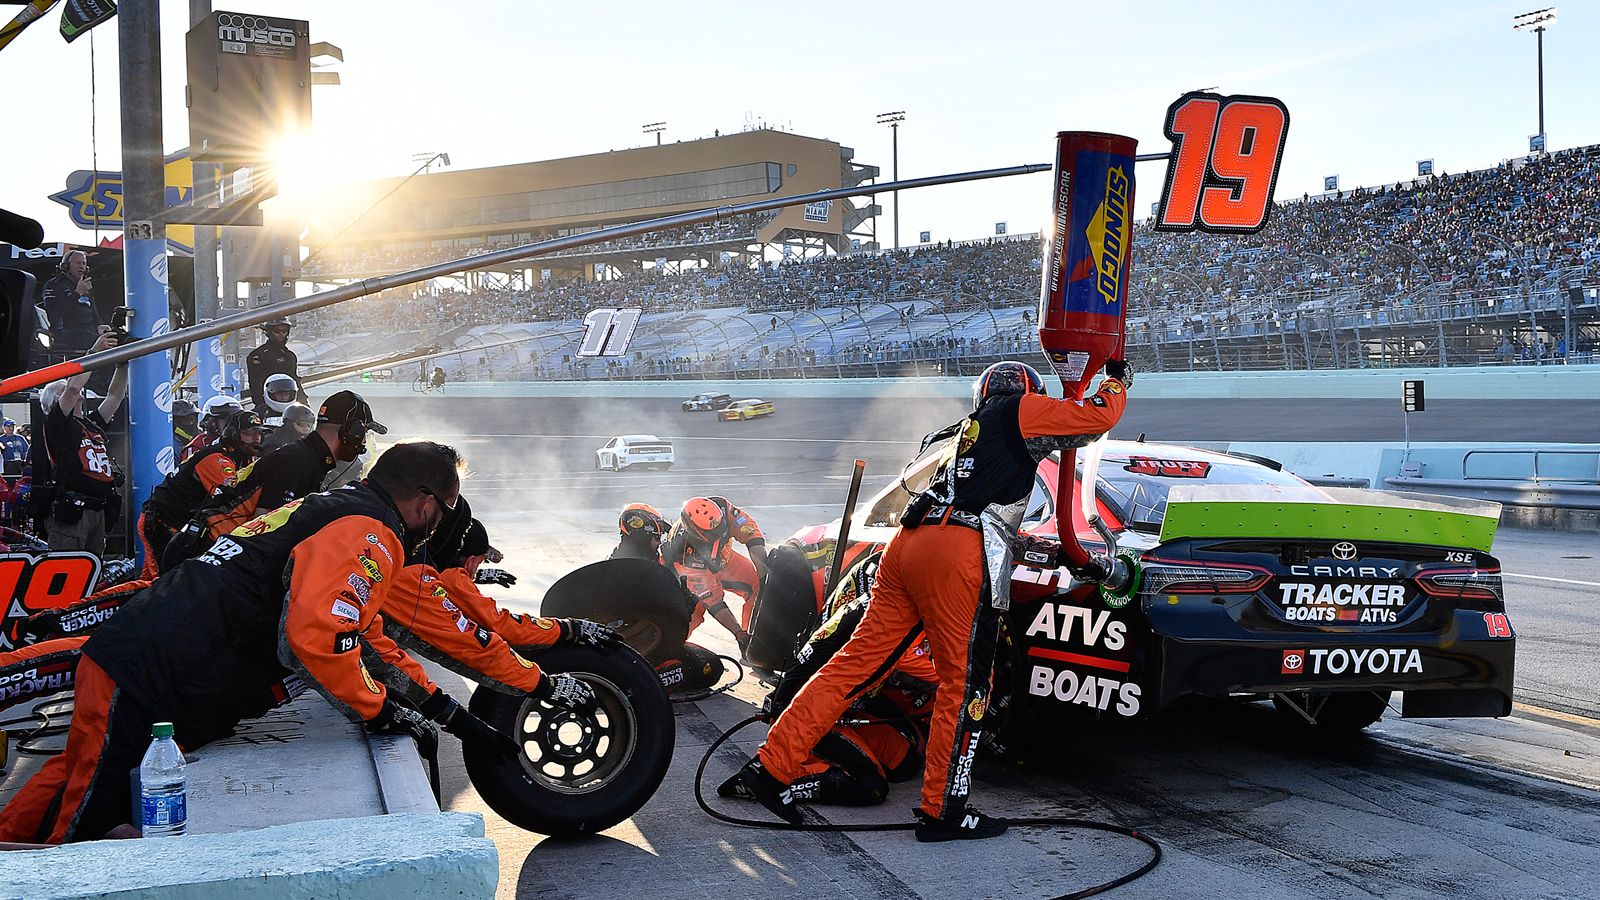 Dead Serious Martin Truex Jr Lost The Nascar Cup Championship Because His Pit Crew Put His Tires On Backward